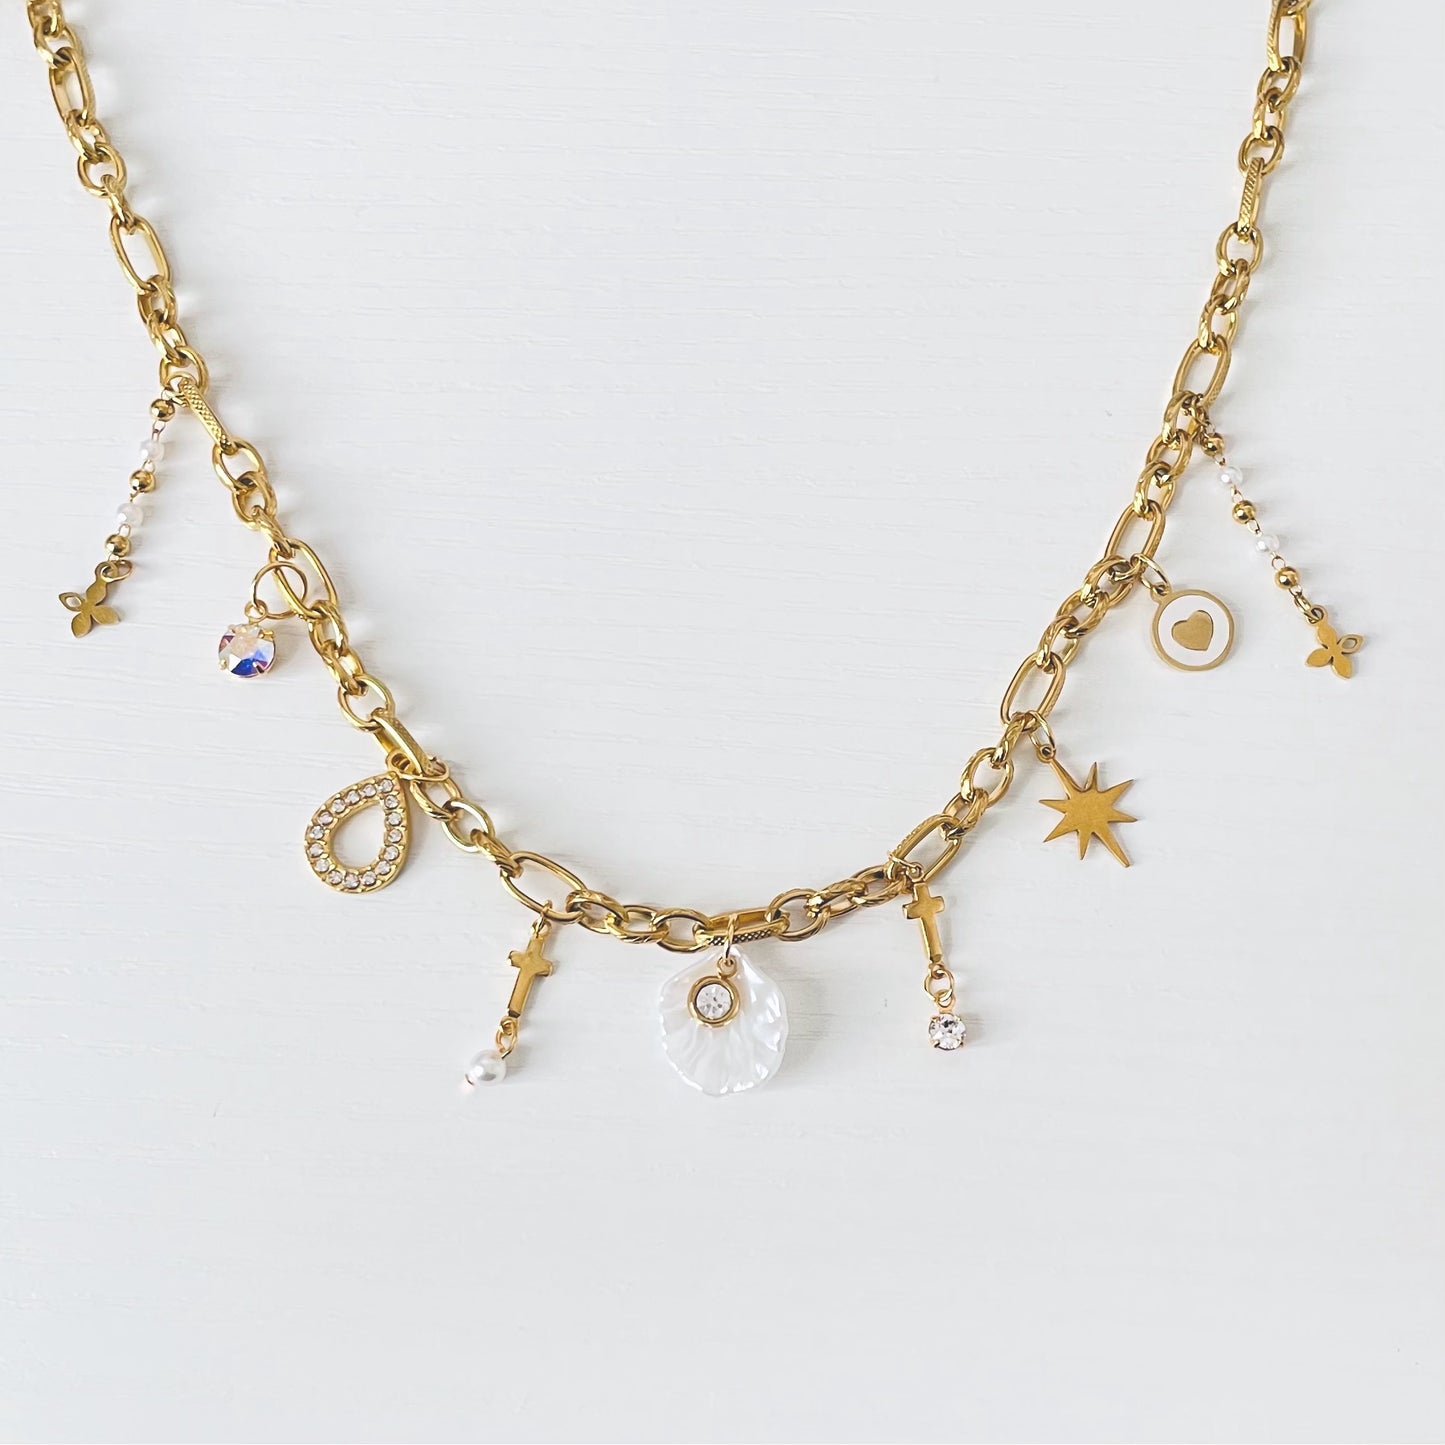 Limited Edition Reign Charm Necklace